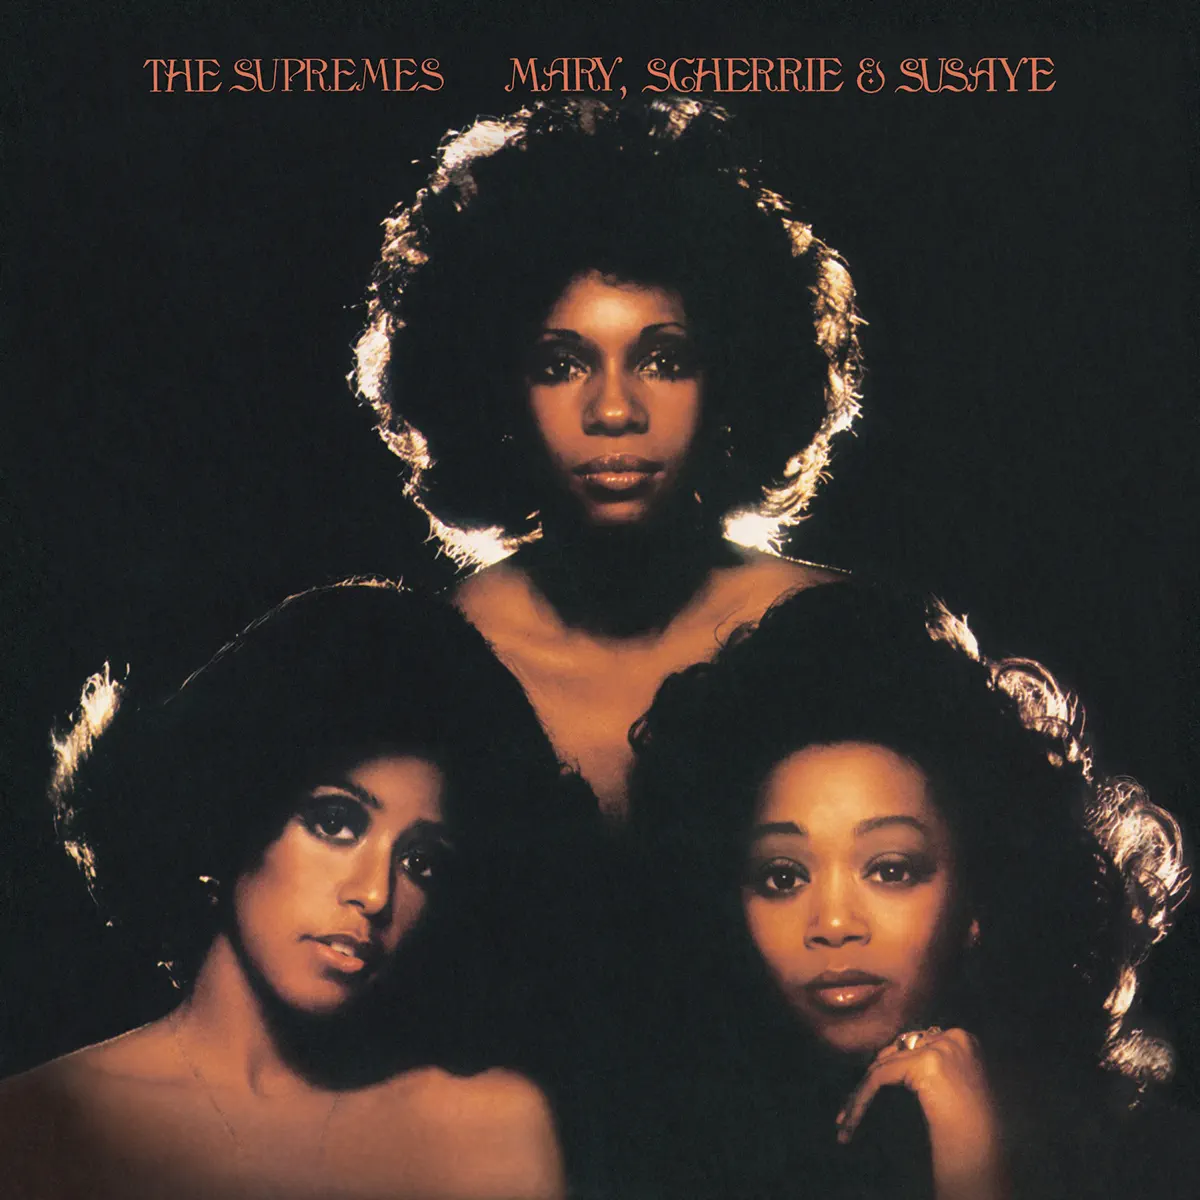 The Supremes - Mary, Scherrie & Susaye (2011) [iTunes Plus AAC M4A]-新房子